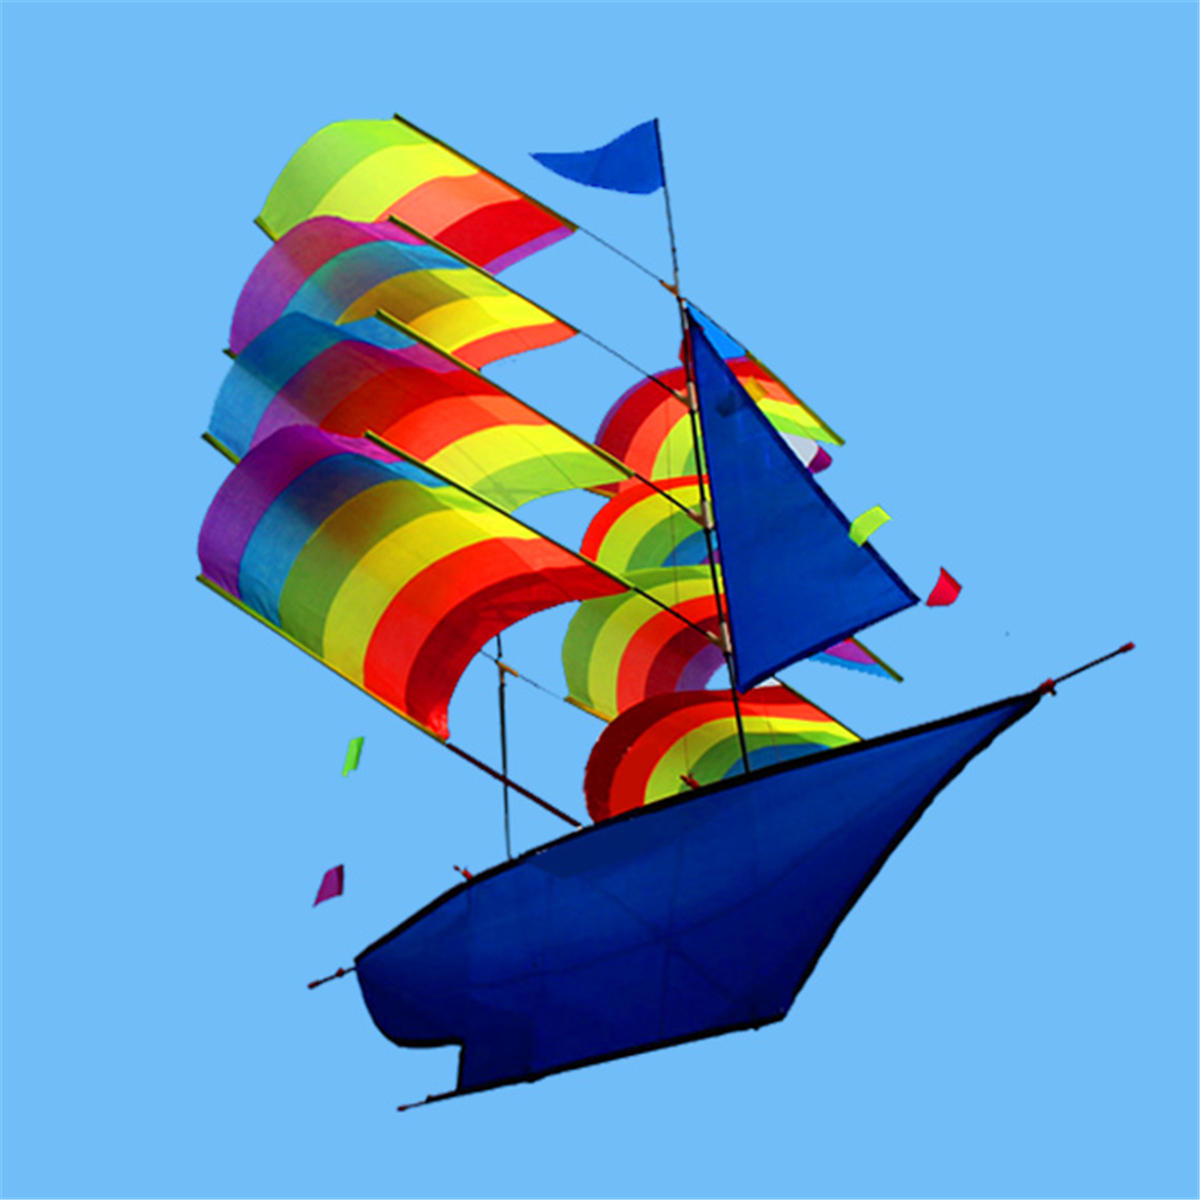 

Huge 37"3D Stereo Sailboat Kite Big Size Flying Outdoor Toy